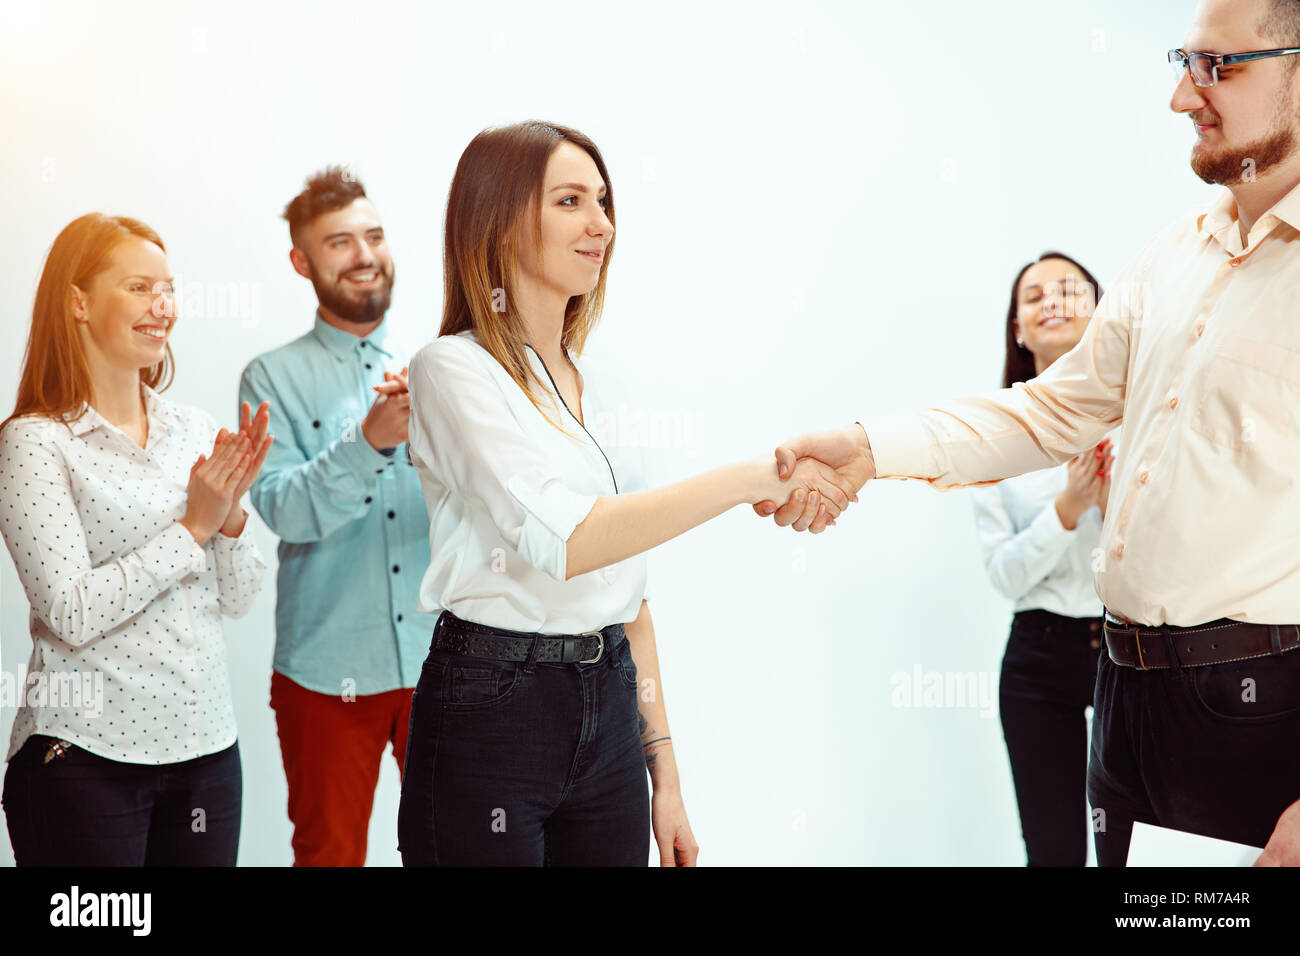 Boss approving and congratulating young successful employee of the company for her successes and good work. National Employee Appreciation Day, businesswoman, businessman, business, success, admire, career growth concept. Stock Photo